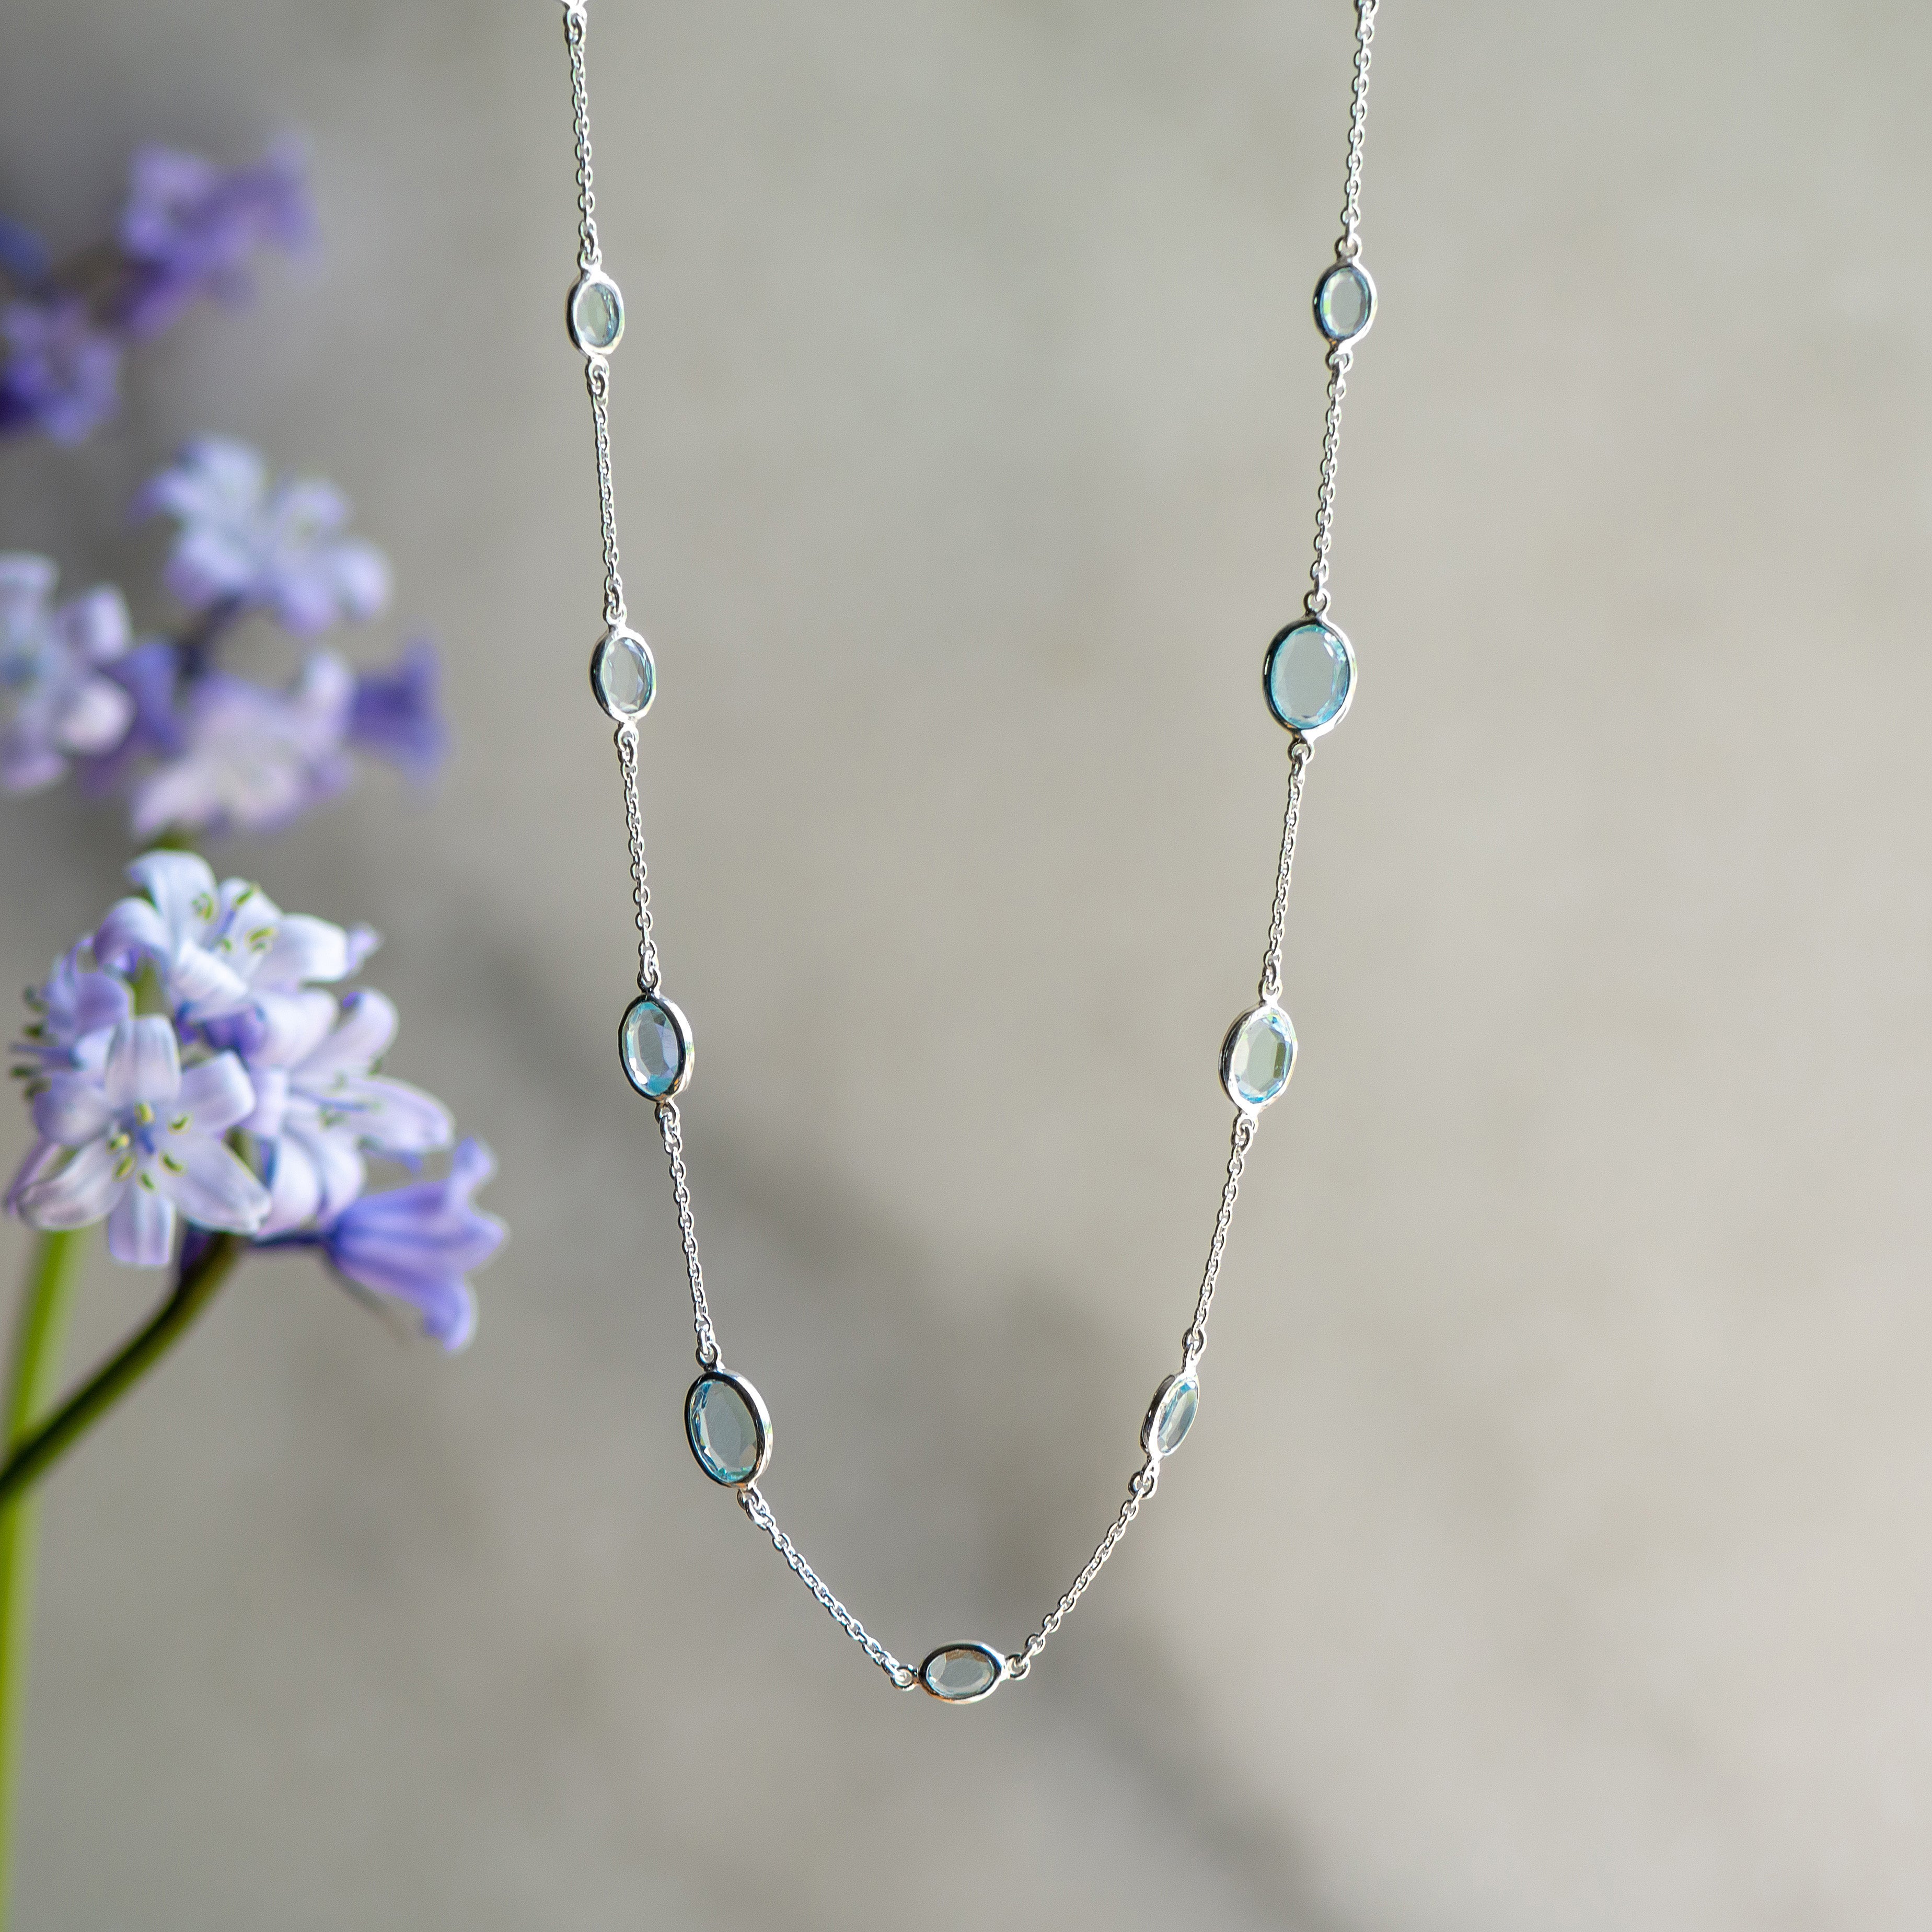 marilyn silver necklace with sky blue topaz from memara